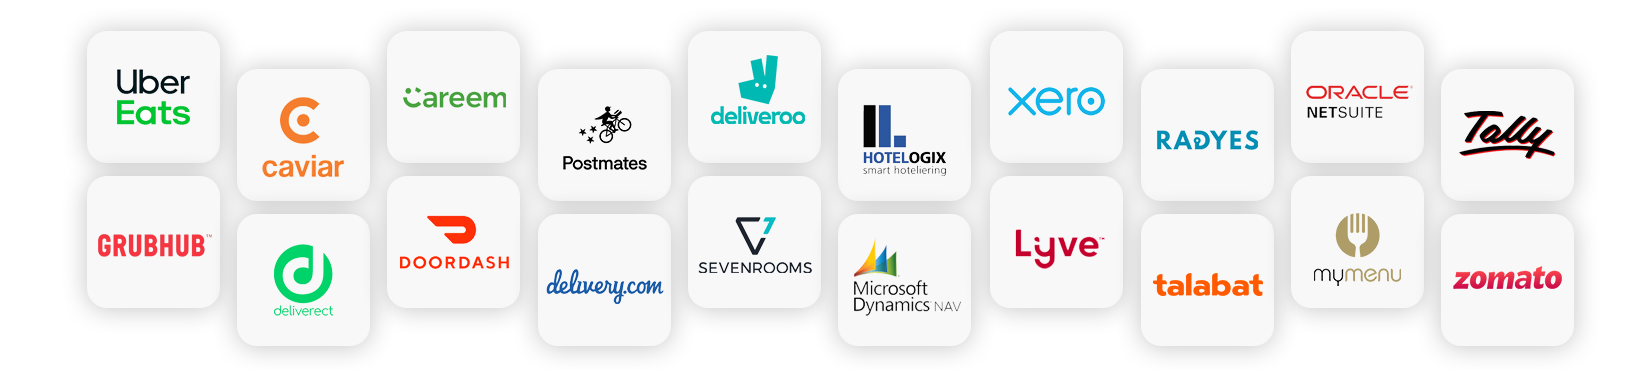 A vector graphic showing various integrations for a cloud kitchen software